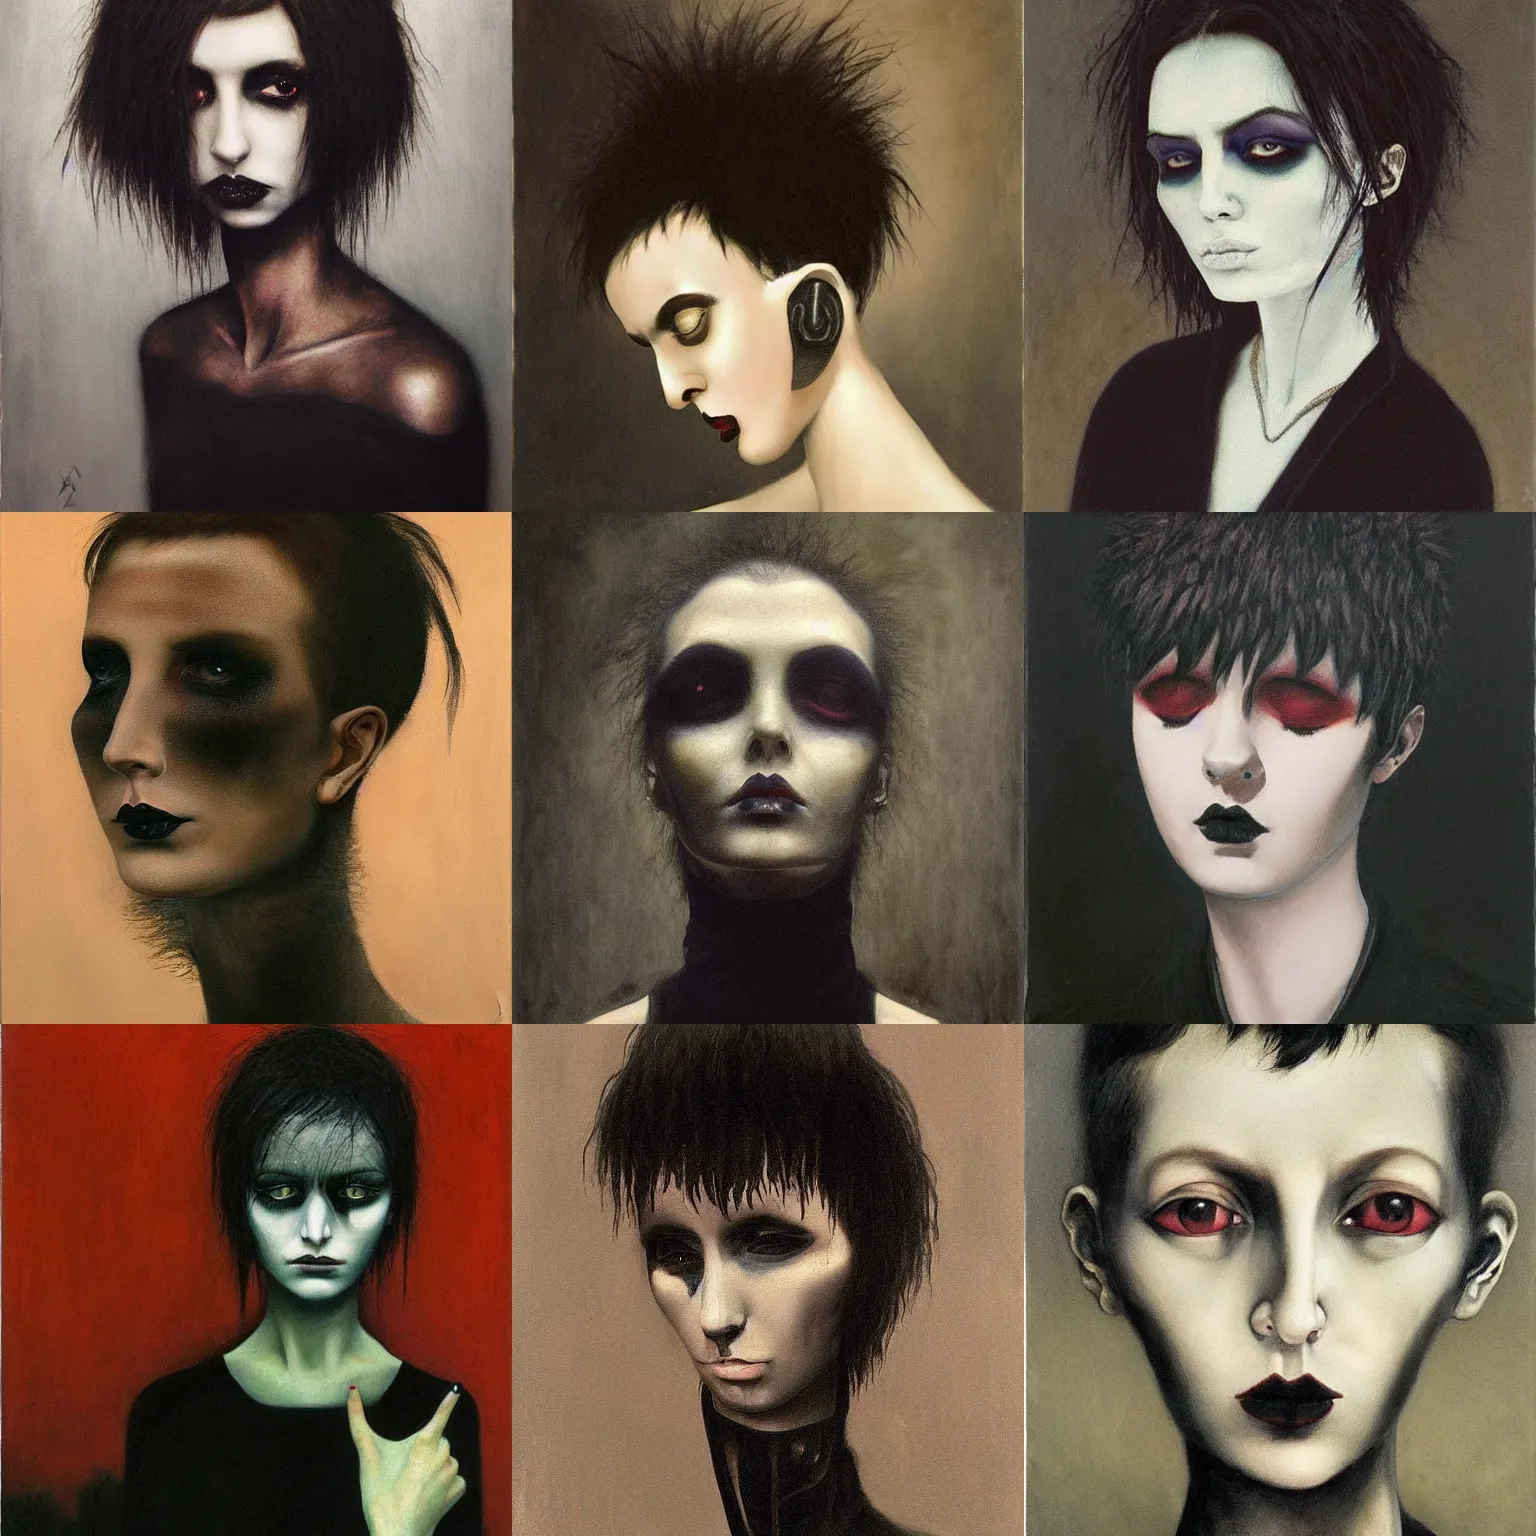 Prompt: A goth portrait painted by Zdzslaw Beksinski. Her hair is dark brown and cut into a short, messy pixie cut. She has a slightly rounded face, with a pointed chin, large entirely-black eyes, and a small nose. She is wearing a black tank top, a black leather jacket, a black knee-length skirt, a black choker, and black leather boots.